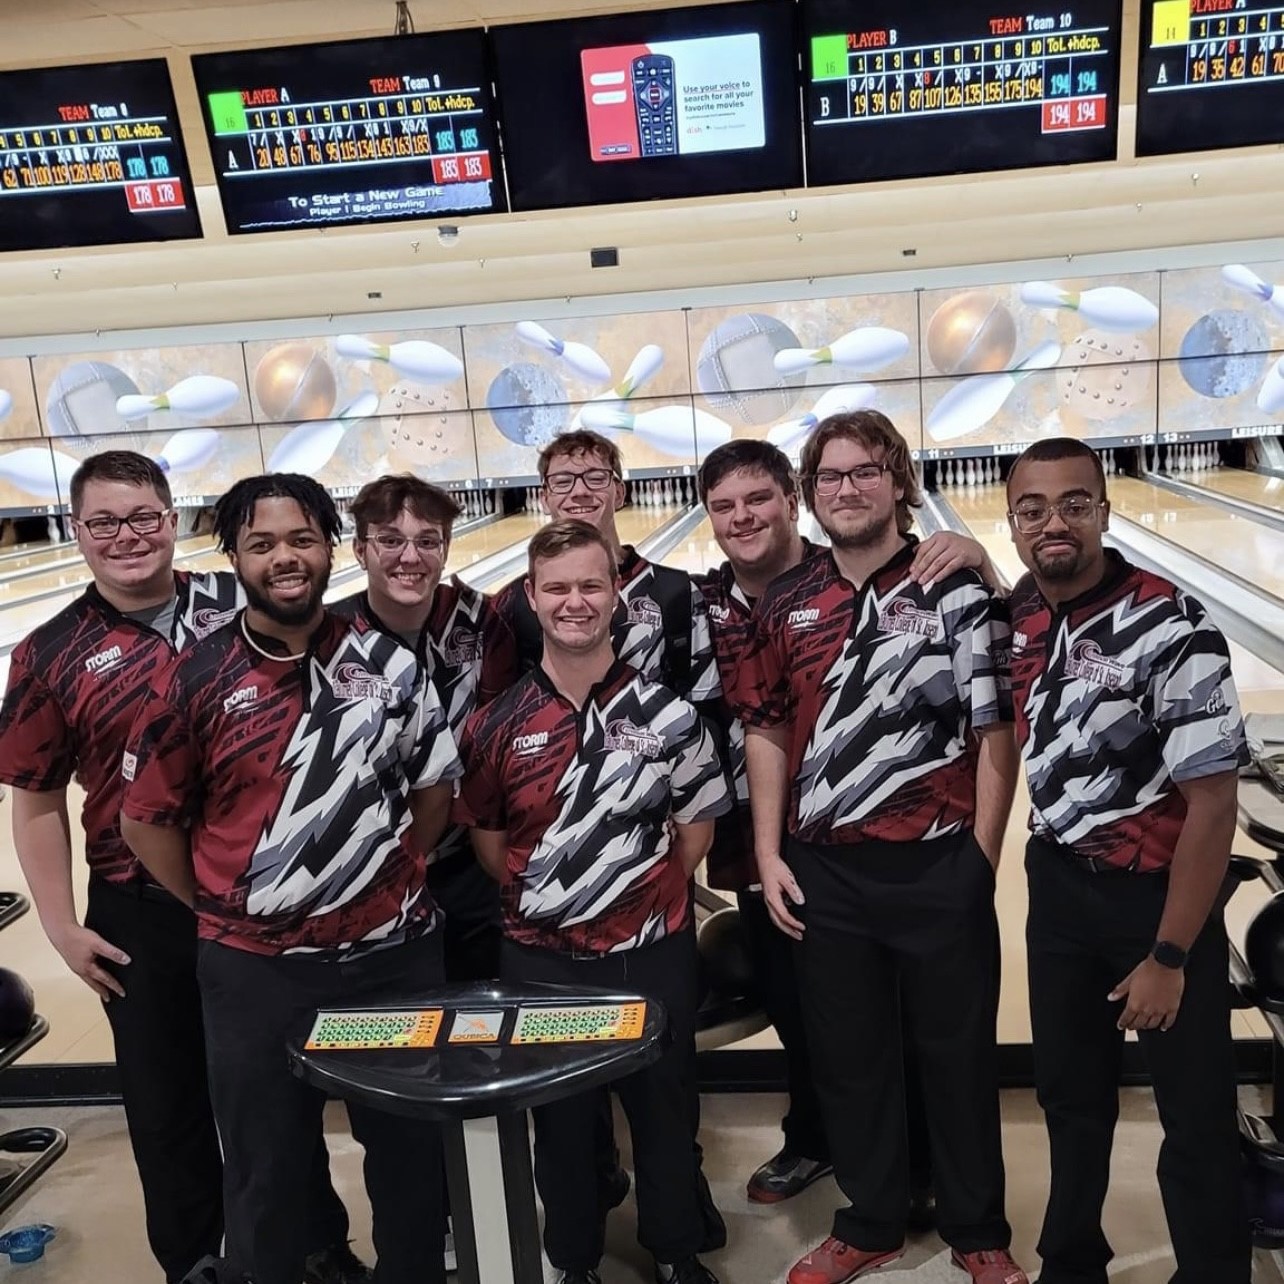 Men’s Bowling finishes 9th at Kegel/ISBPA Collegiate Classic